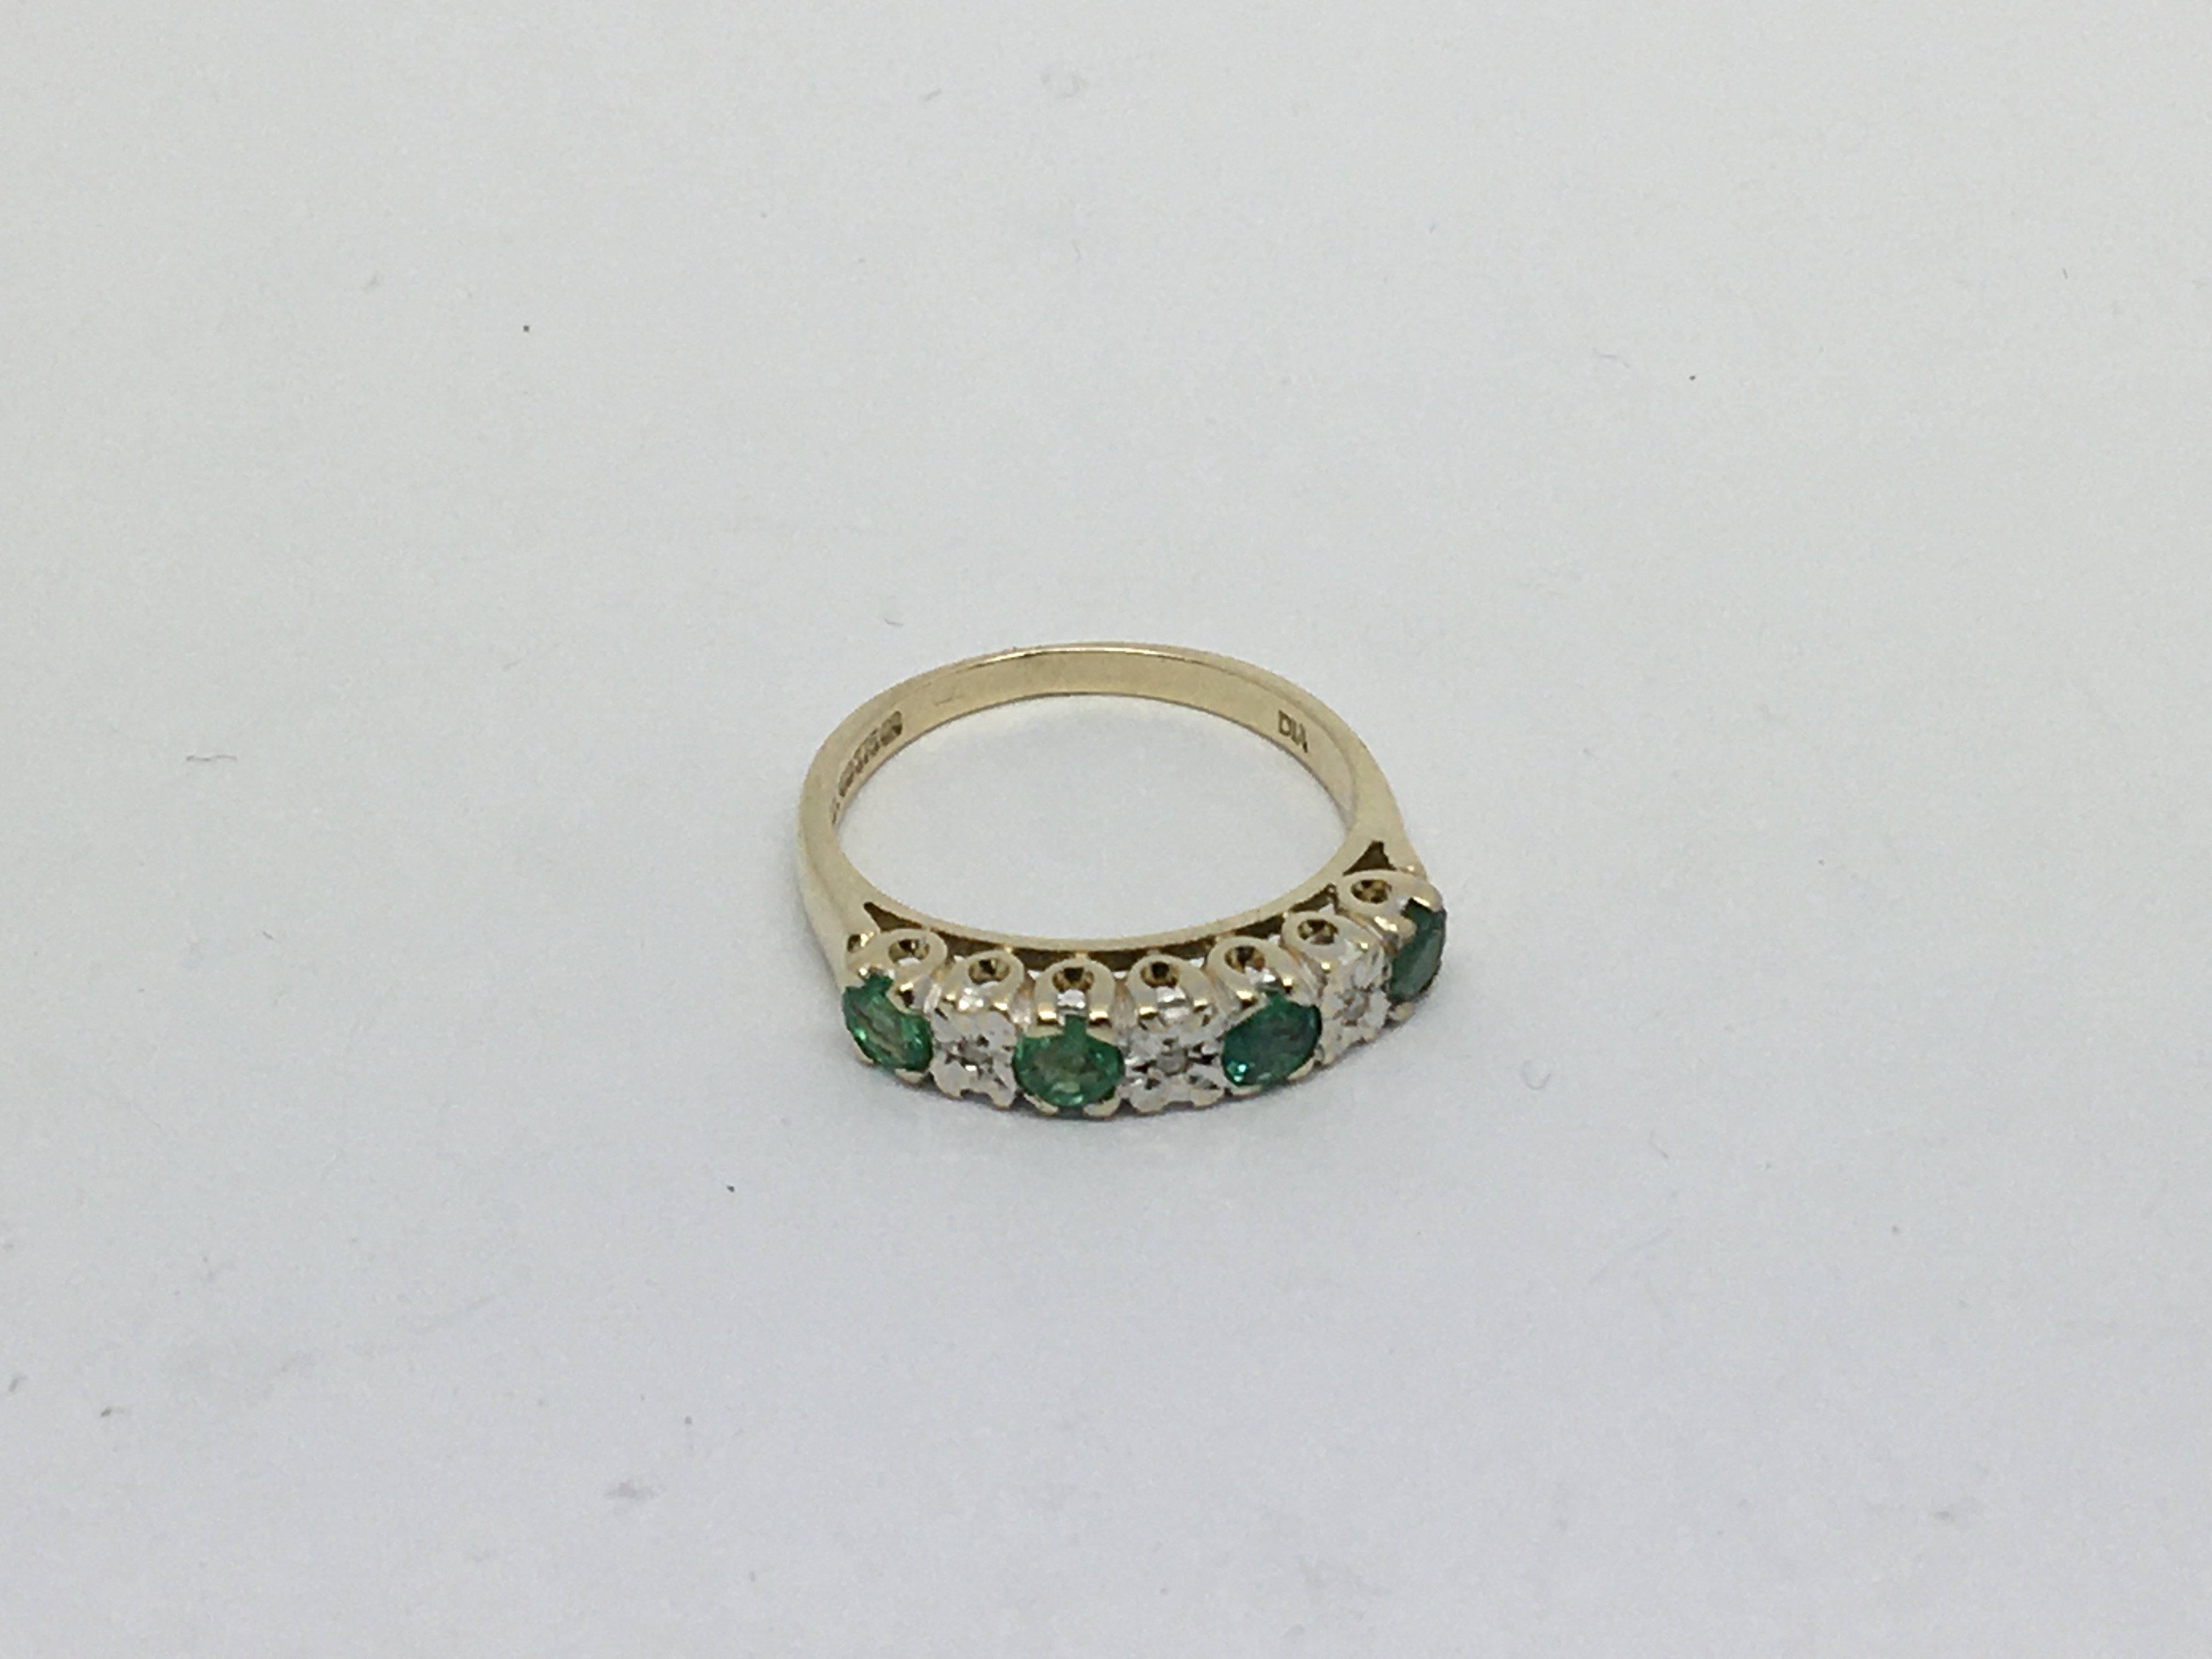 A 9ct gold ring set with 4 emeralds and 4 diamonds